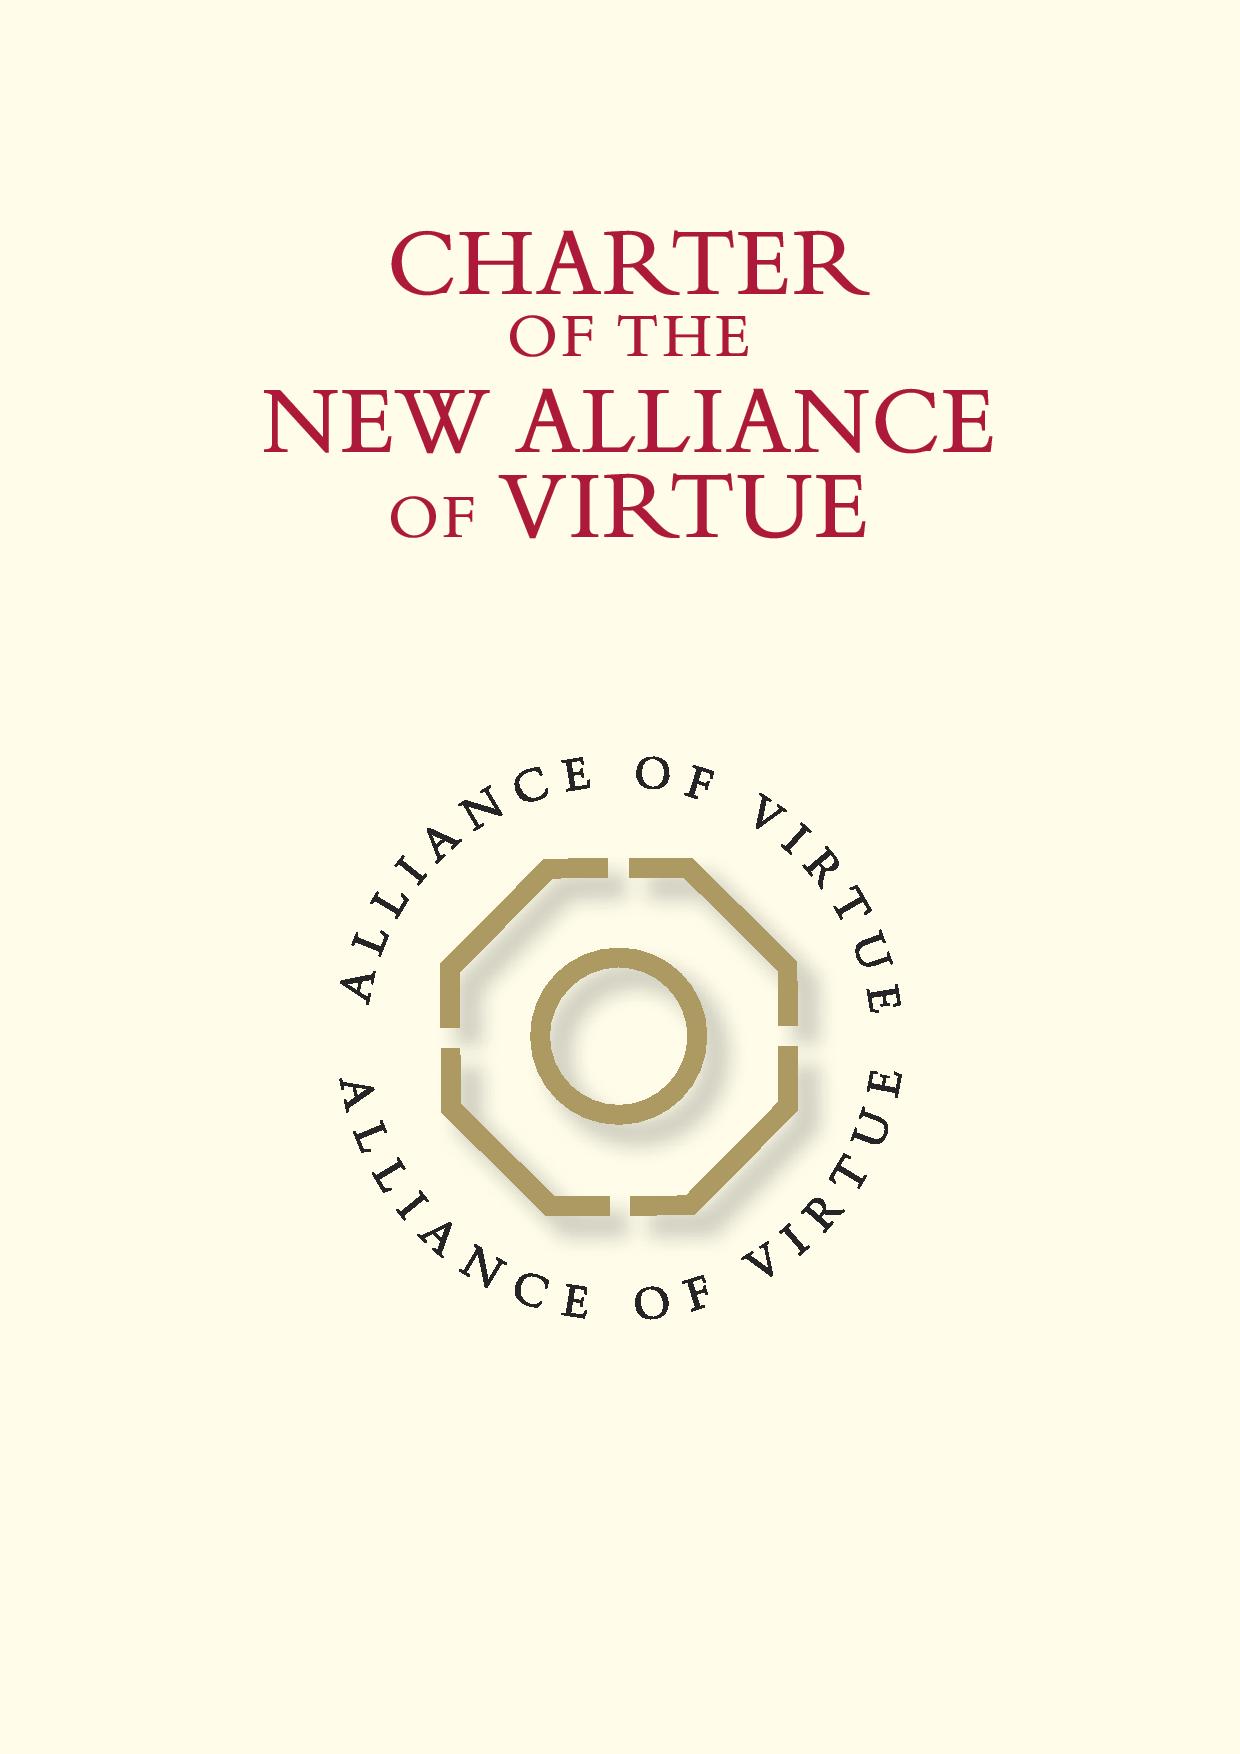 The New Alliance of Virtue